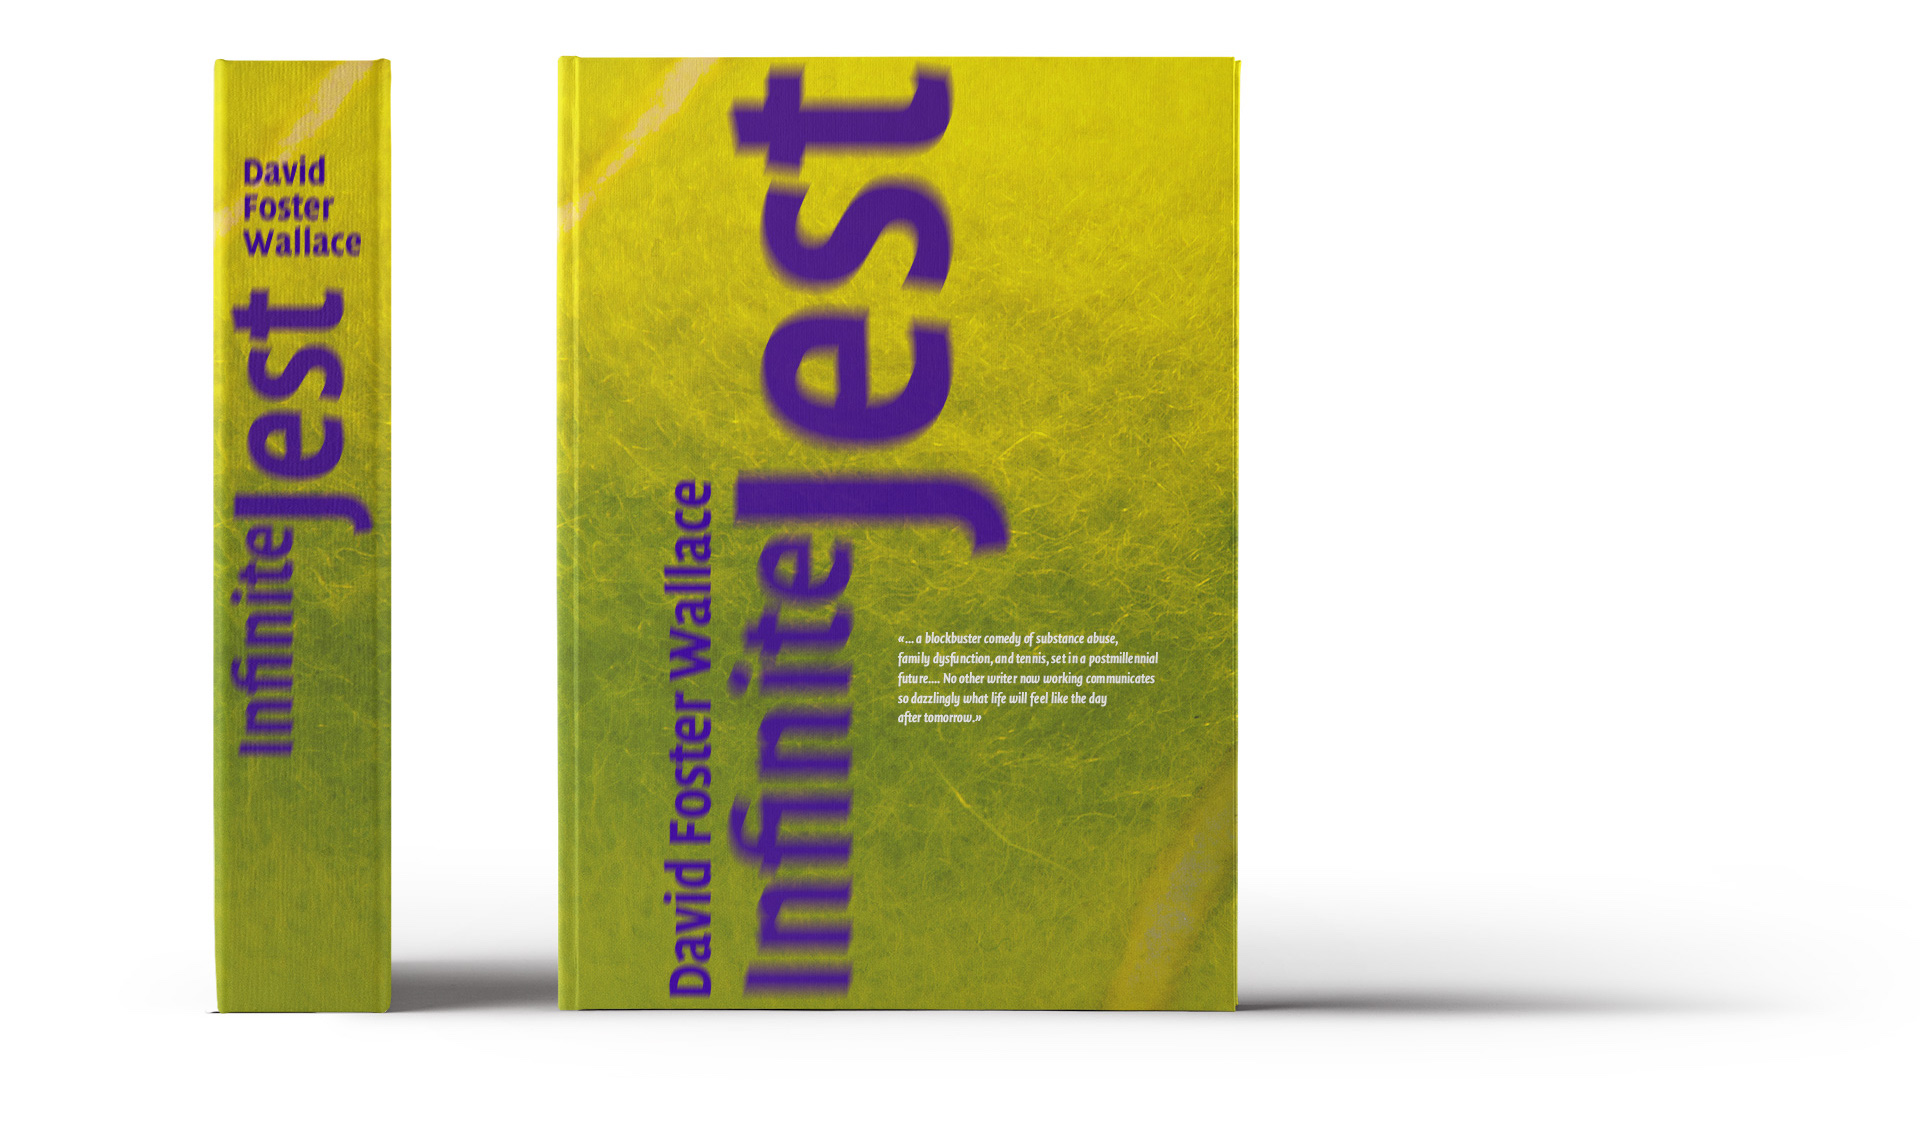 alternative book cover design for David Foster Wallace's novel Infinite Jest by f-land